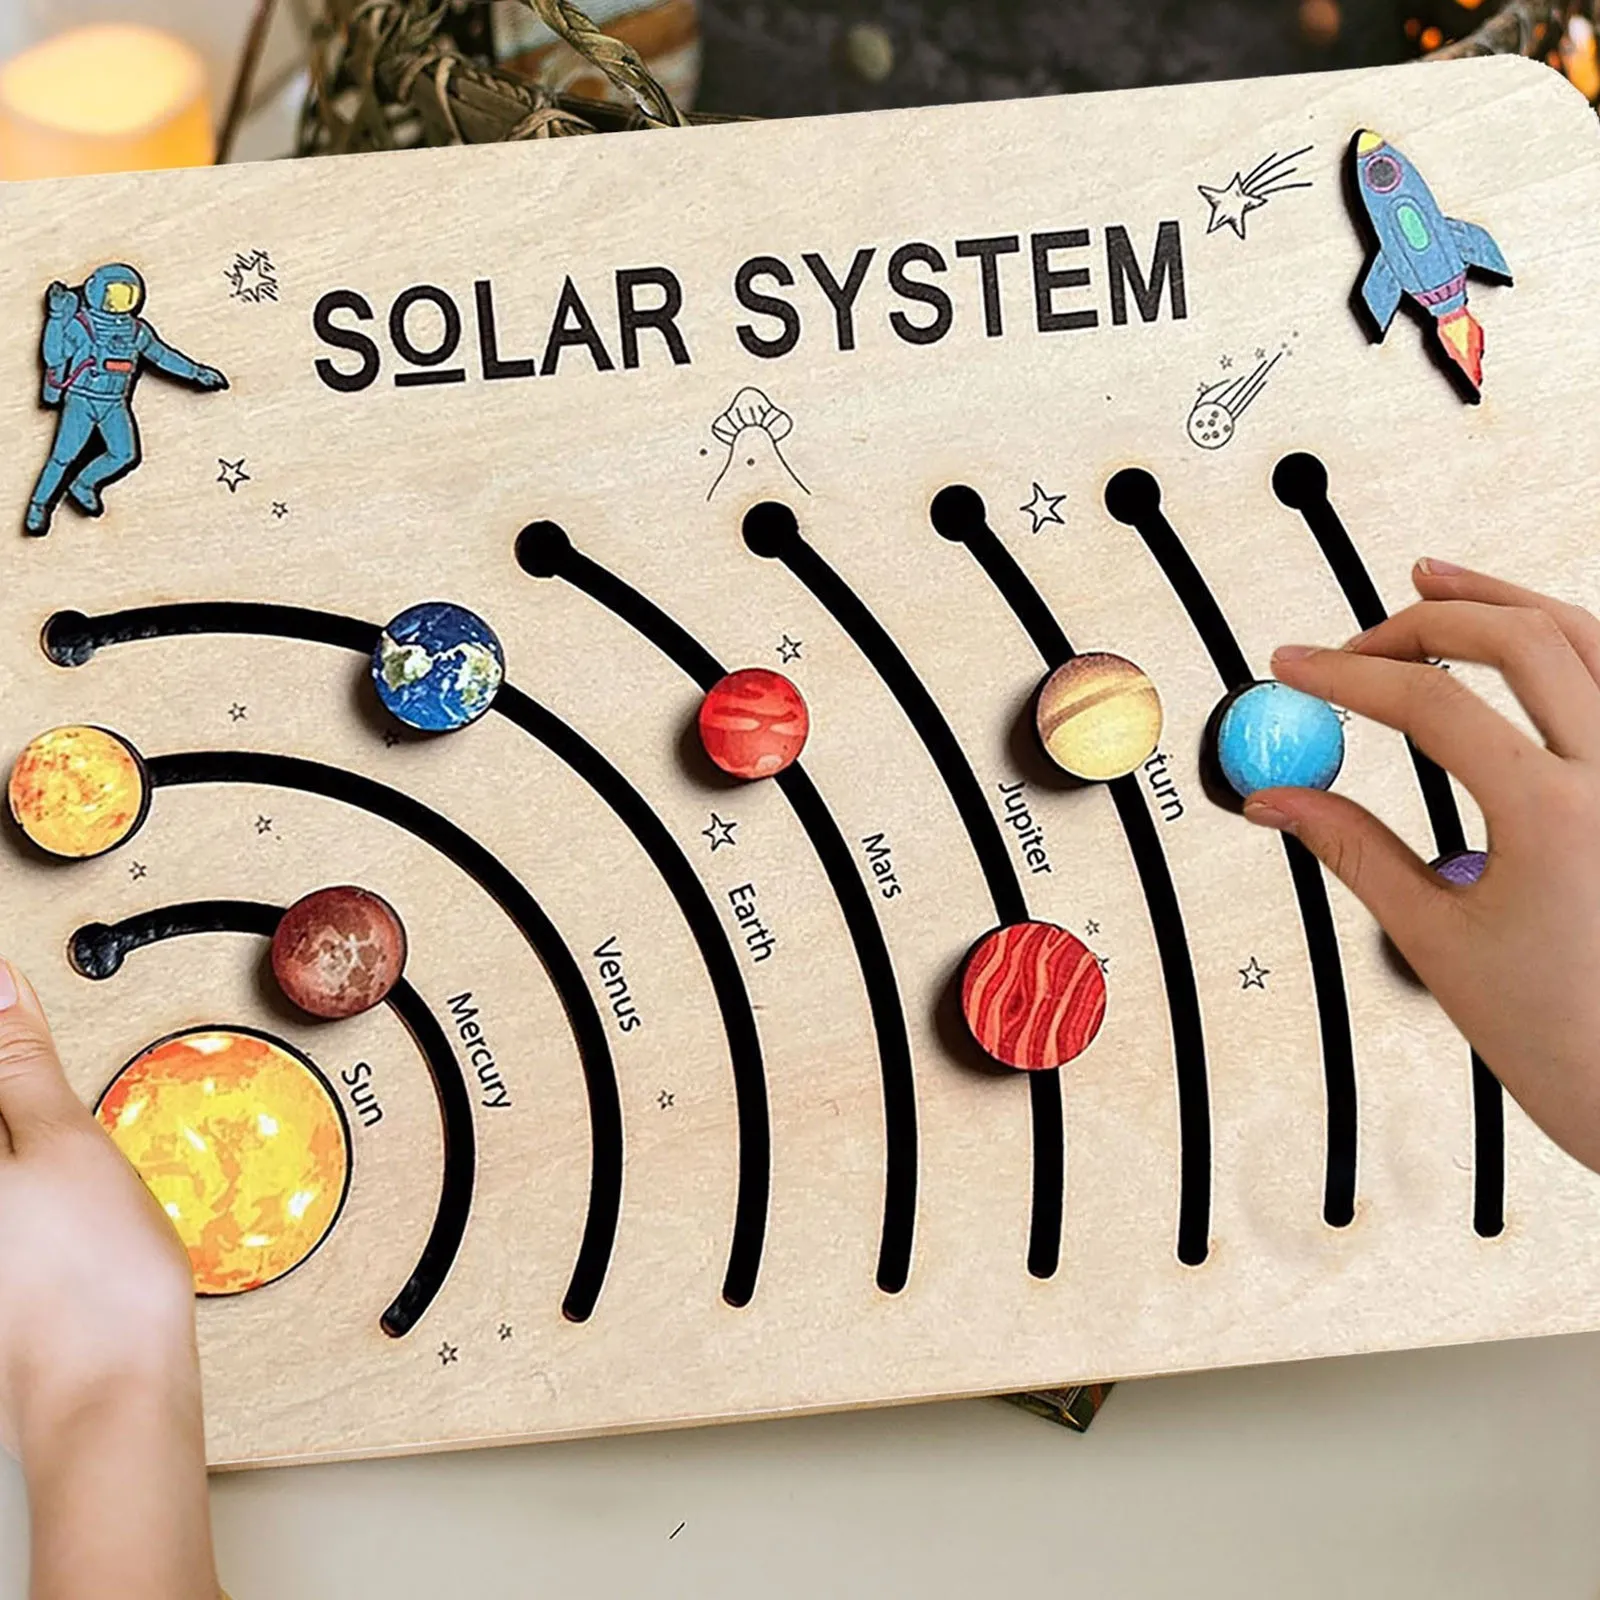 

Technology Personalized Educational Planets Wooden Toy Tabletop Wooden Gift Puzzle Birthday System Solar Toddler Puzzle Toy #50